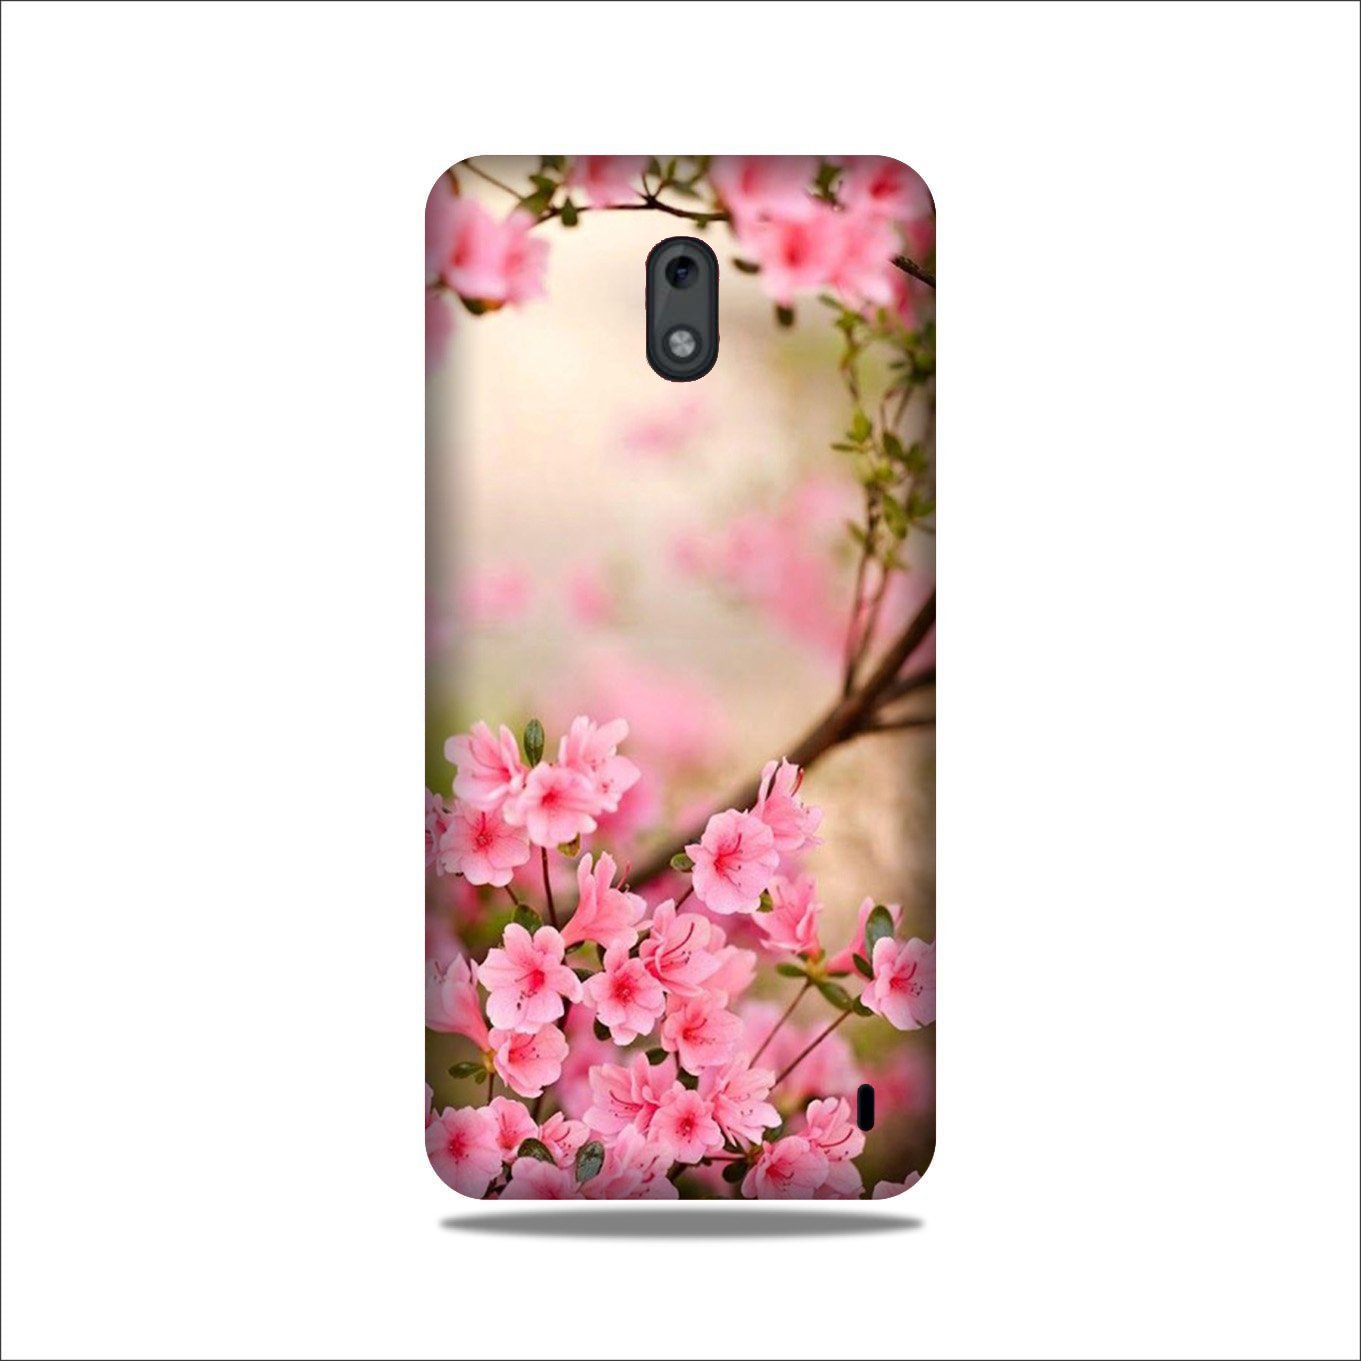 Pink flowers Case for Nokia 3